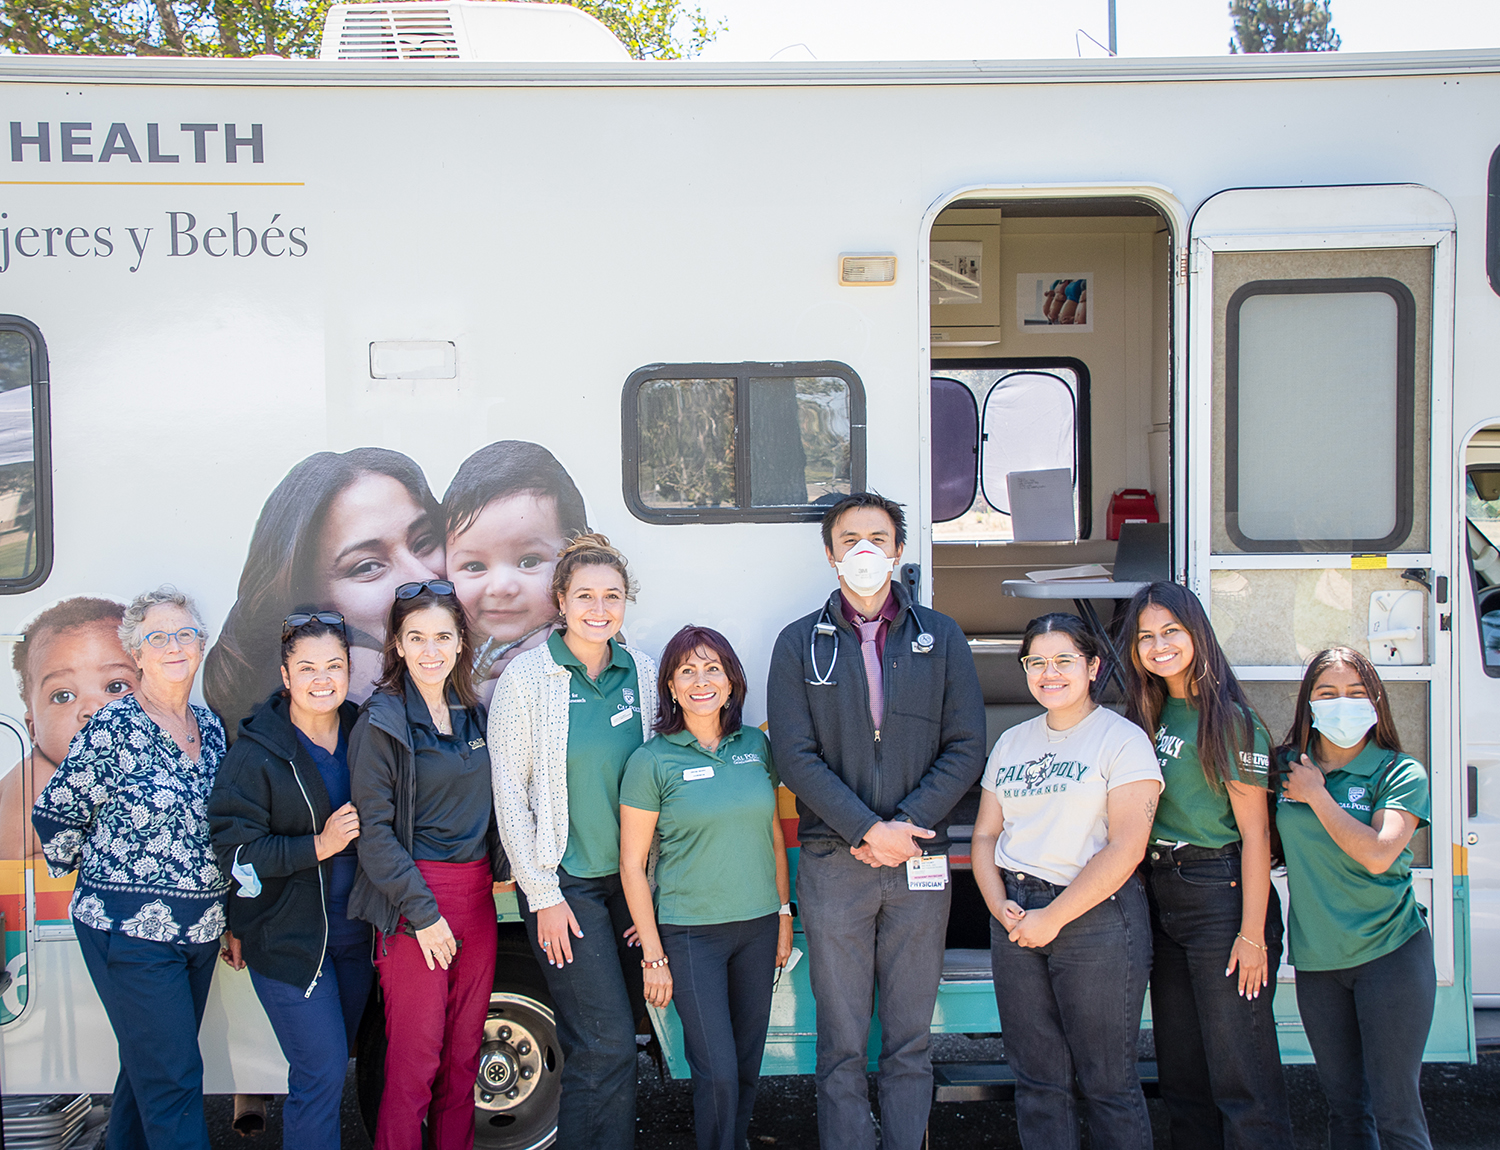 MHU Clinic and Staff. From left to right are Medical Director Vicki Charbonneau, nurse practitioner; Phlebotomist Rubi Solano, CPT-1; Director of Operations Suzanne Phelan, Ph.D.; kinesiology major Elena Kraemer, a Cal Poly Health Ambassador; Mobile Health Unit Coordinator Cristina Macedo, MSW; Dignity Health Resident Anthony Reyes, MD; public health major Nathalie Zamora, a Cal Poly Health Ambassador; public health major Isabella Araoz, a Cal Poly Health Ambassador; and Mixtec Interpreter Paola Ligario.